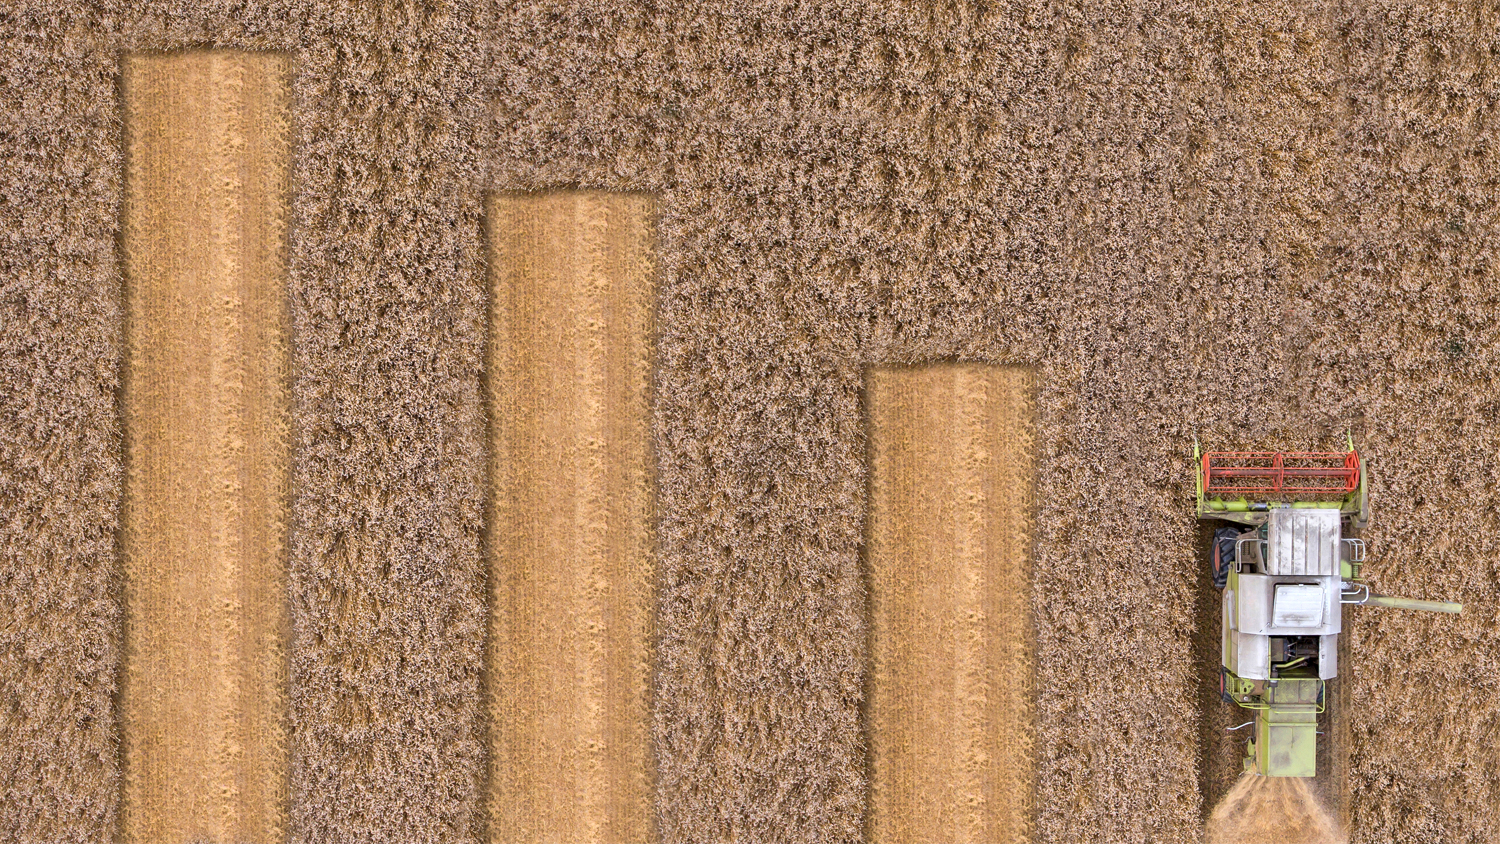 Aerial view of combine in field creating a bar chart visual.